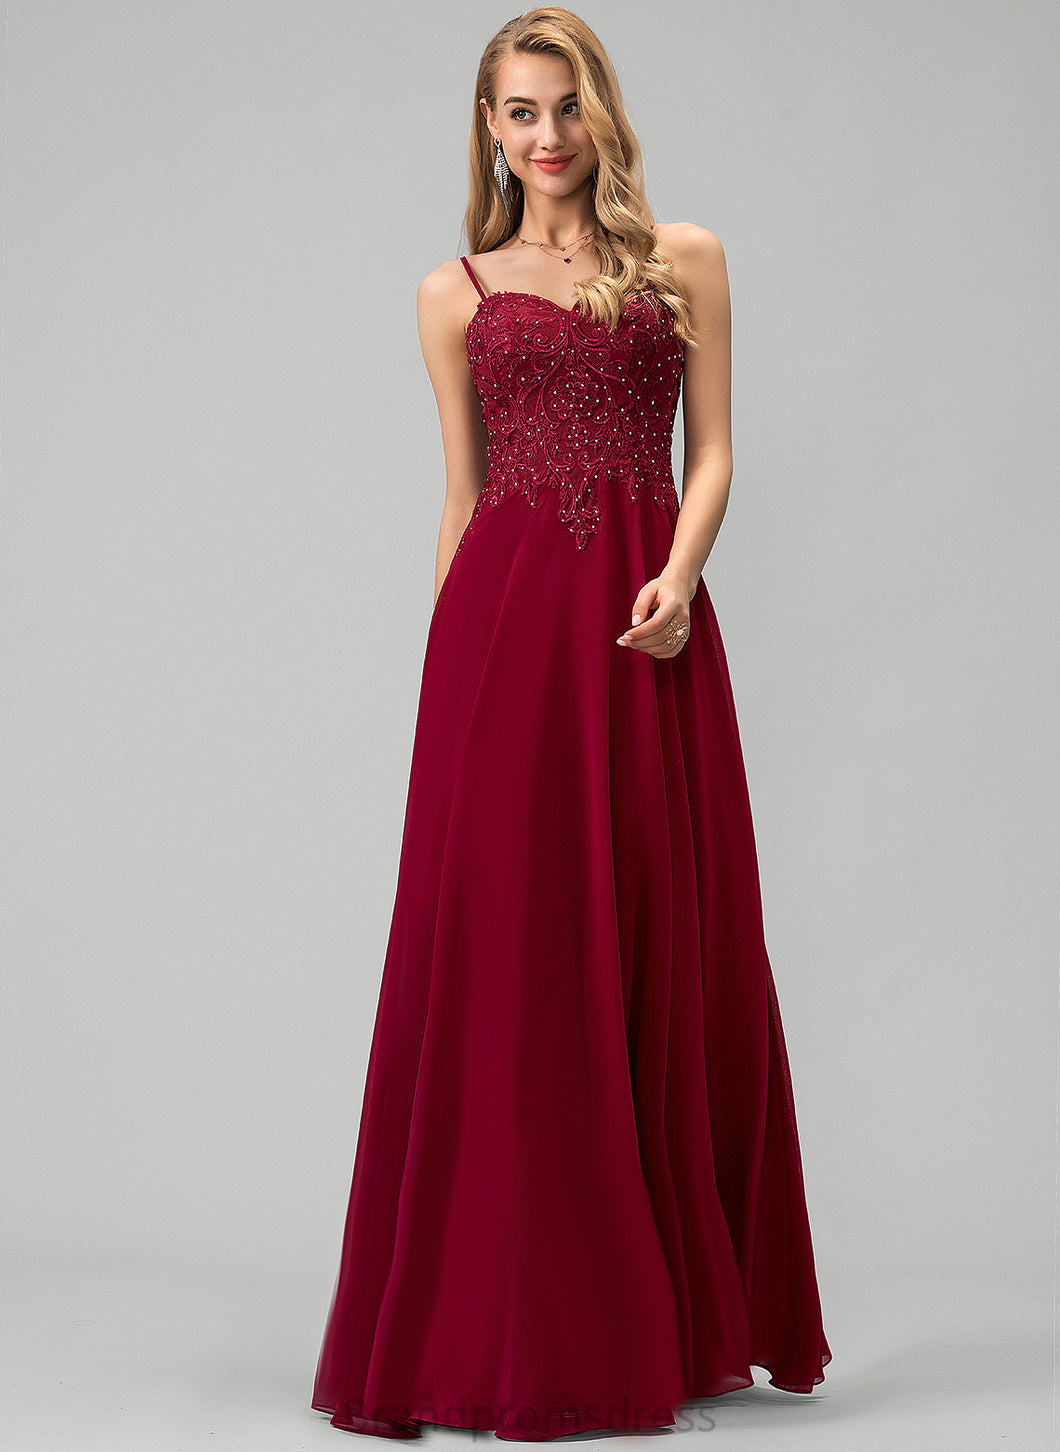 Prom Dresses Floor-Length A-Line Chiffon With Bella Rhinestone Lace Sweetheart